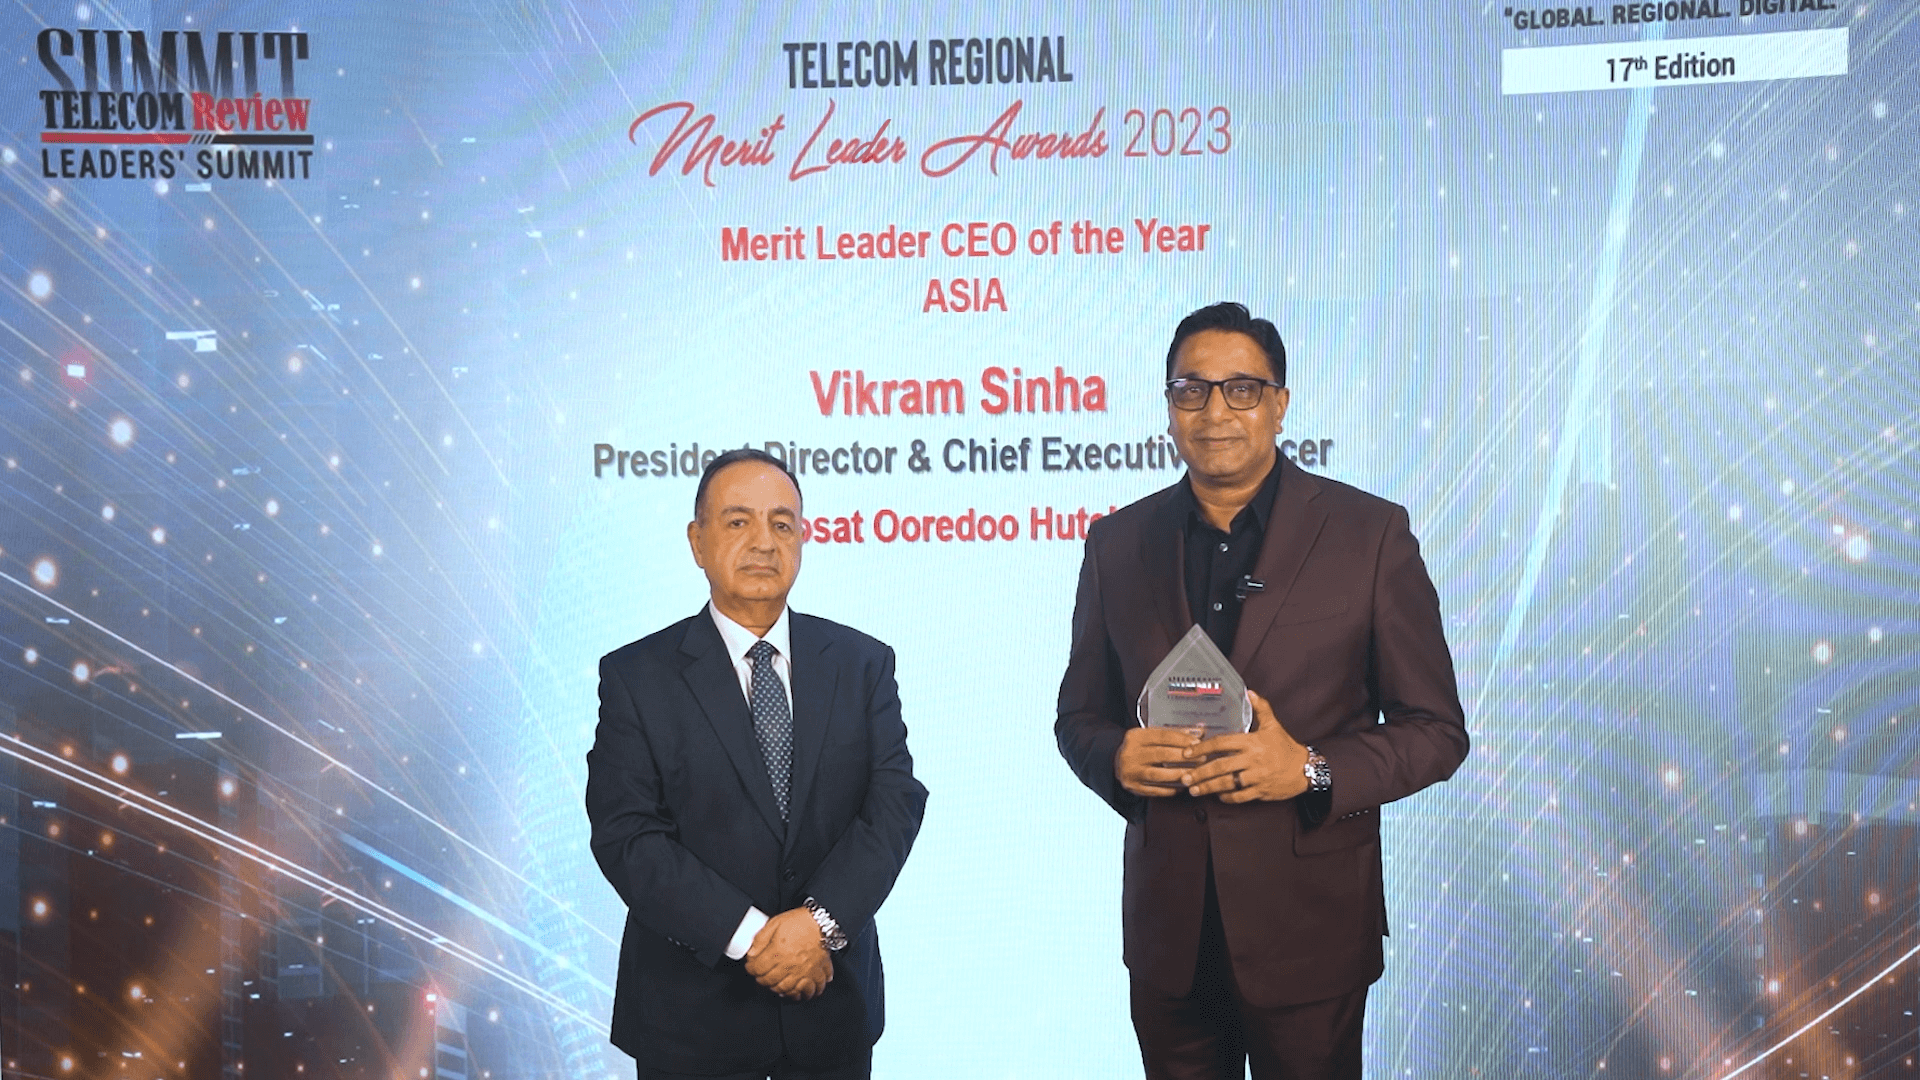 Vikram Sinha, President Director & CEO of Indosat Awarded Merit Leader CEO of the Year – Asia 